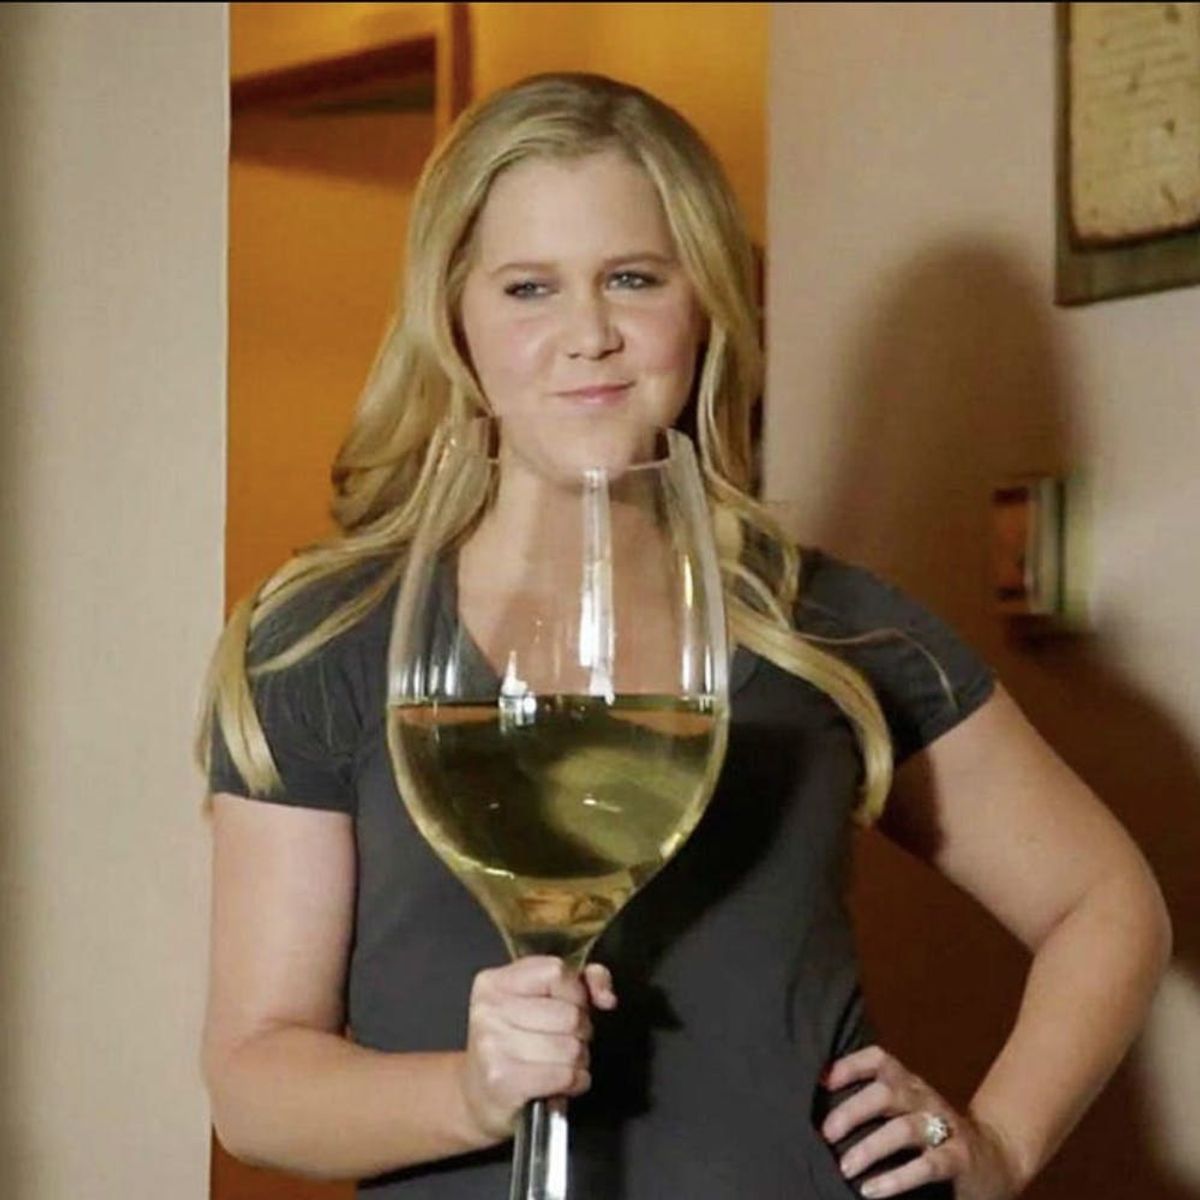 The Pop Culture “Wine Mom” Is Hilarious, Relatable — and a Giant Red Flag